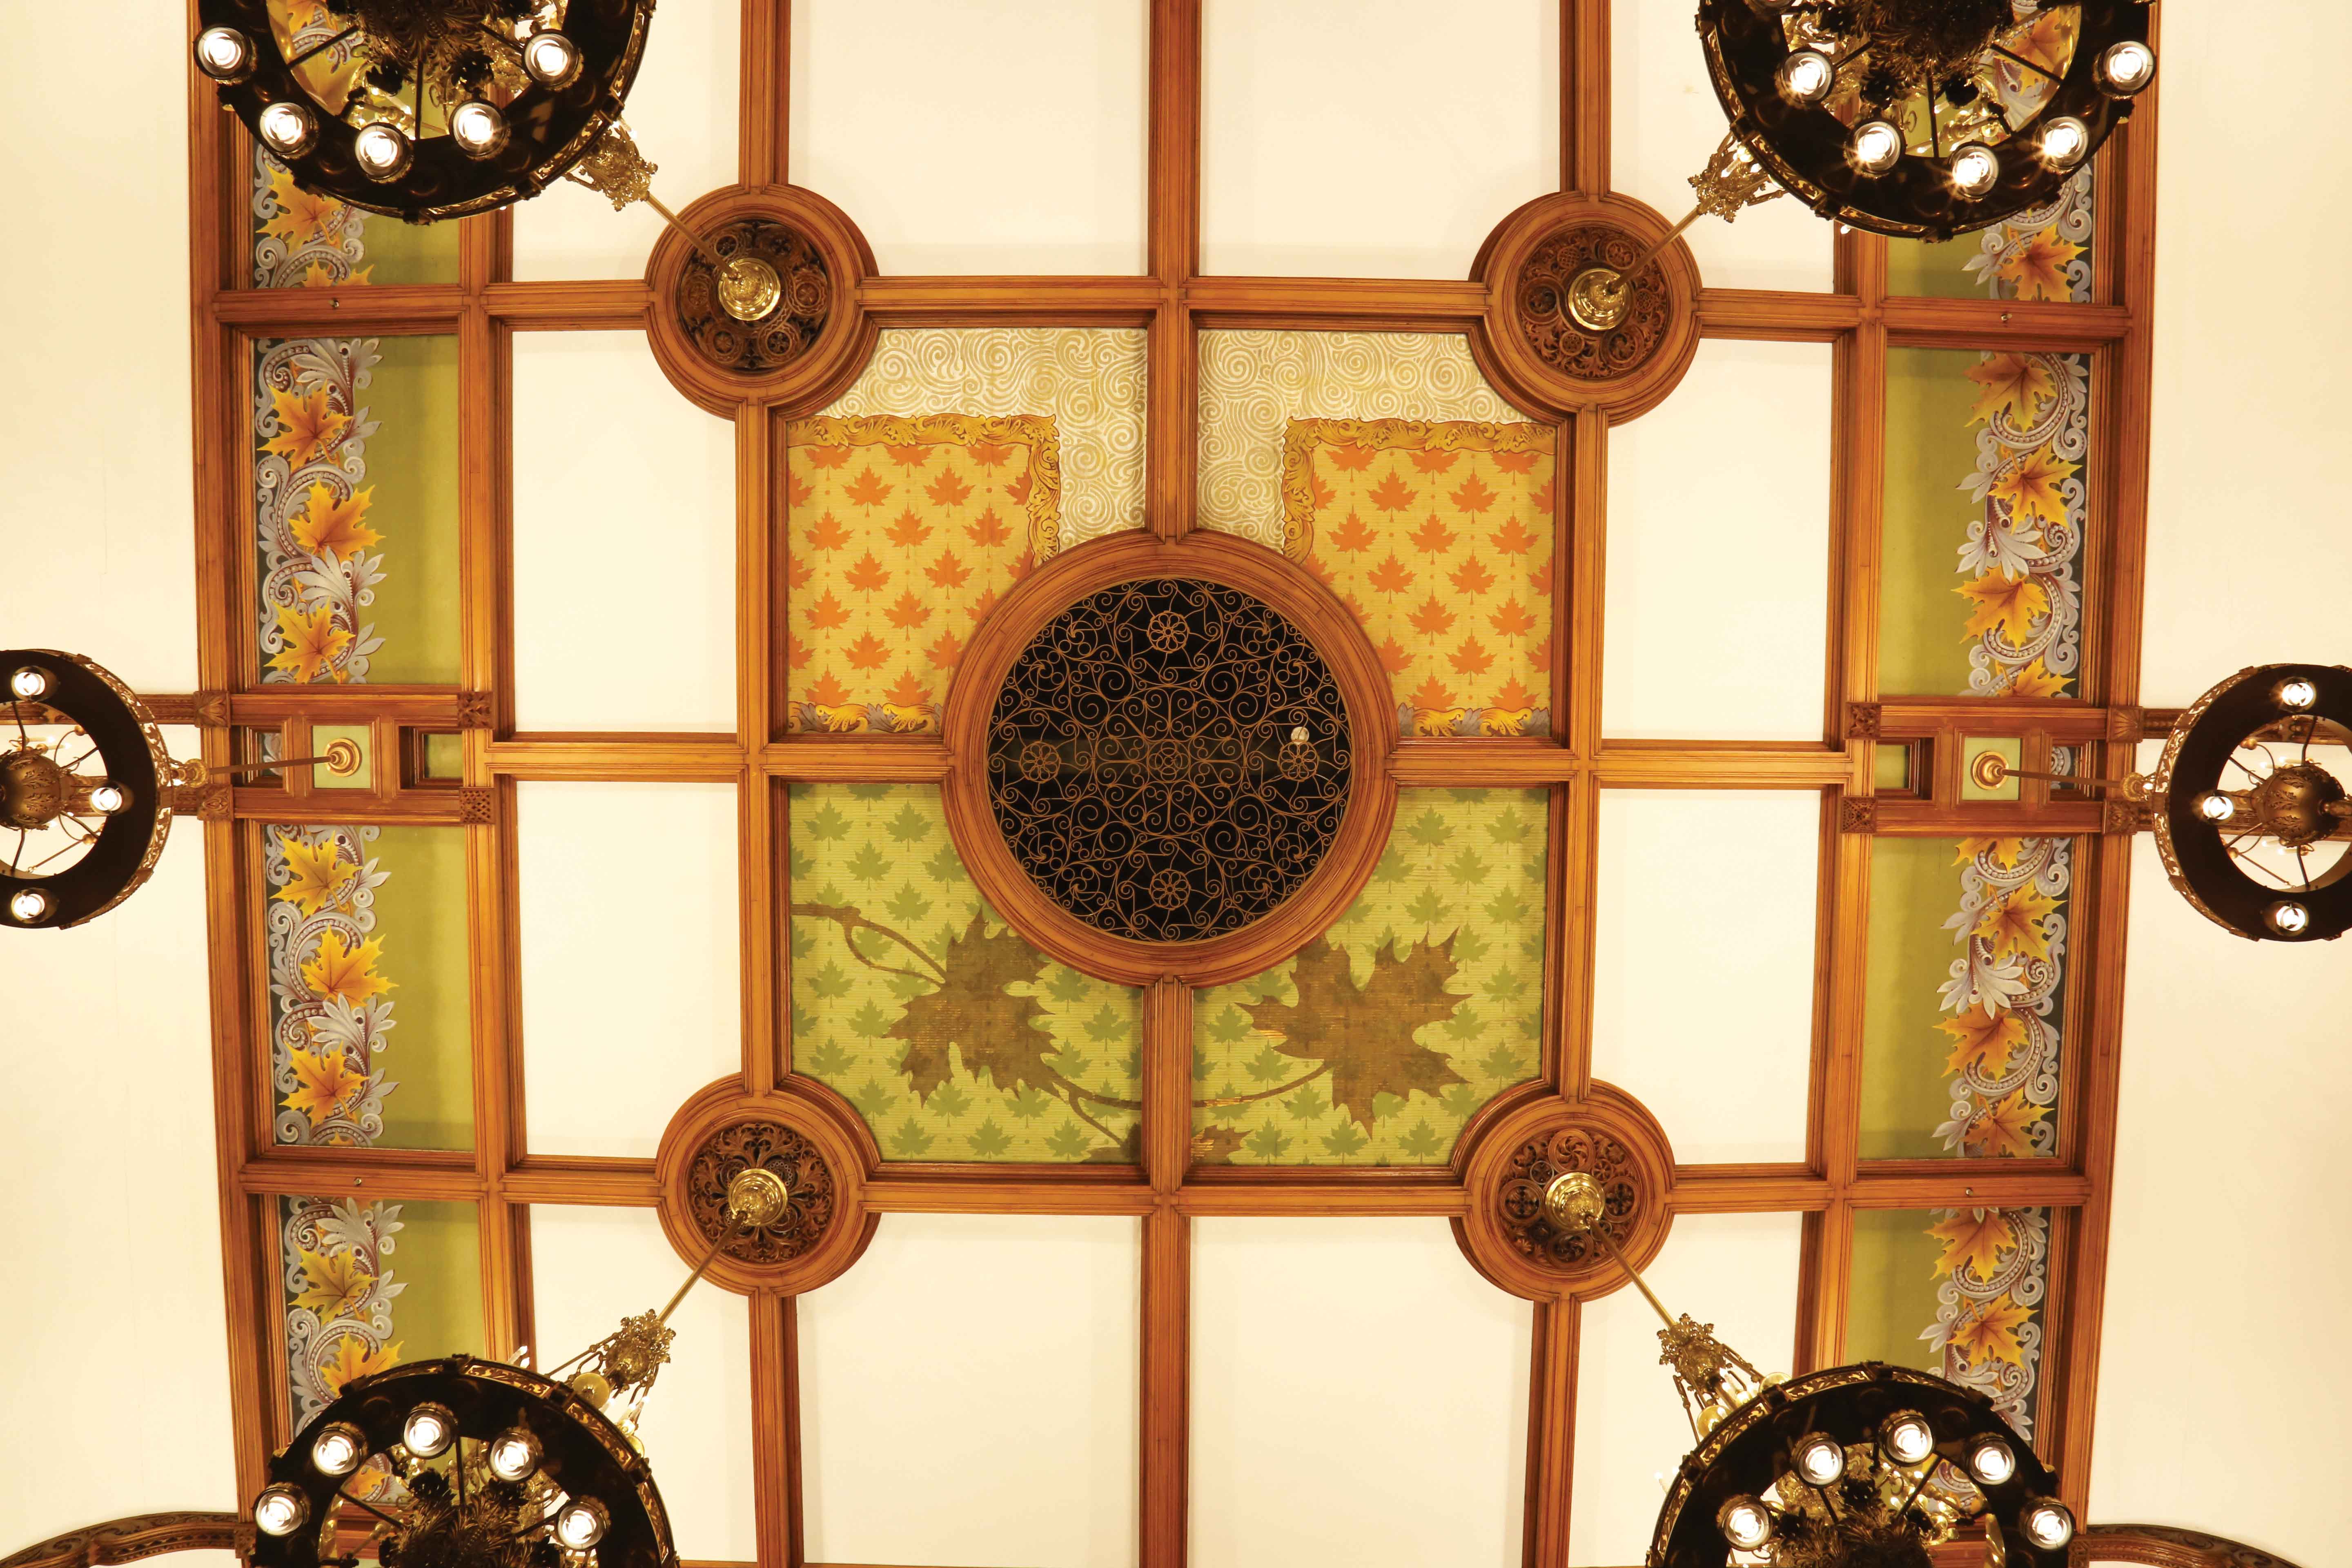 Painted details on the Chamber ceiling